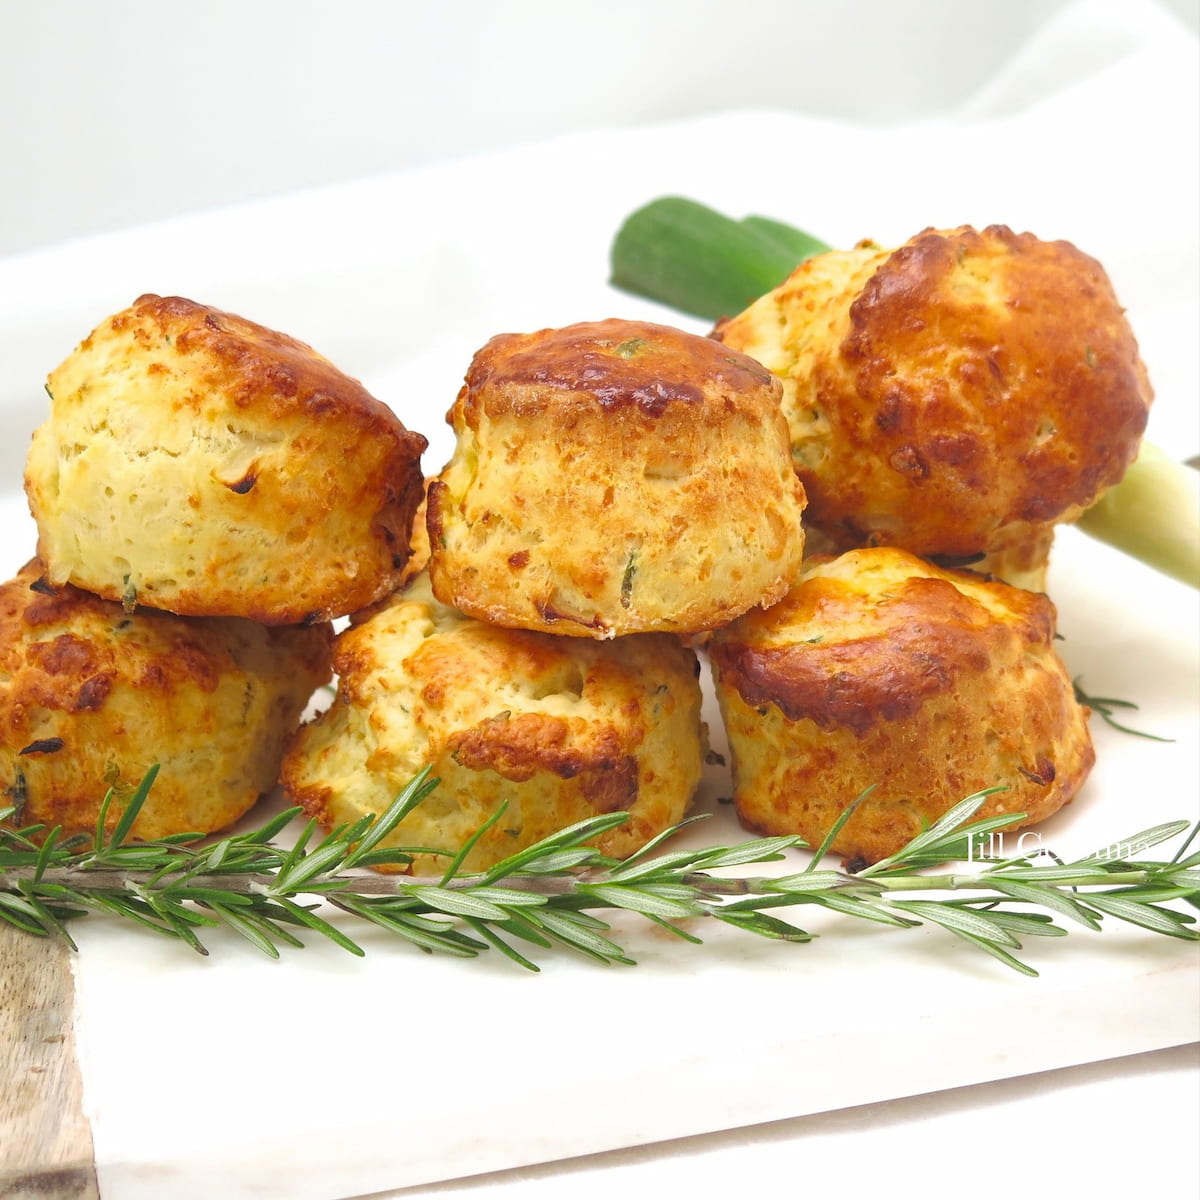 high rise cheesy scones piled on top of each other, surrounded by rosemary and spring onions